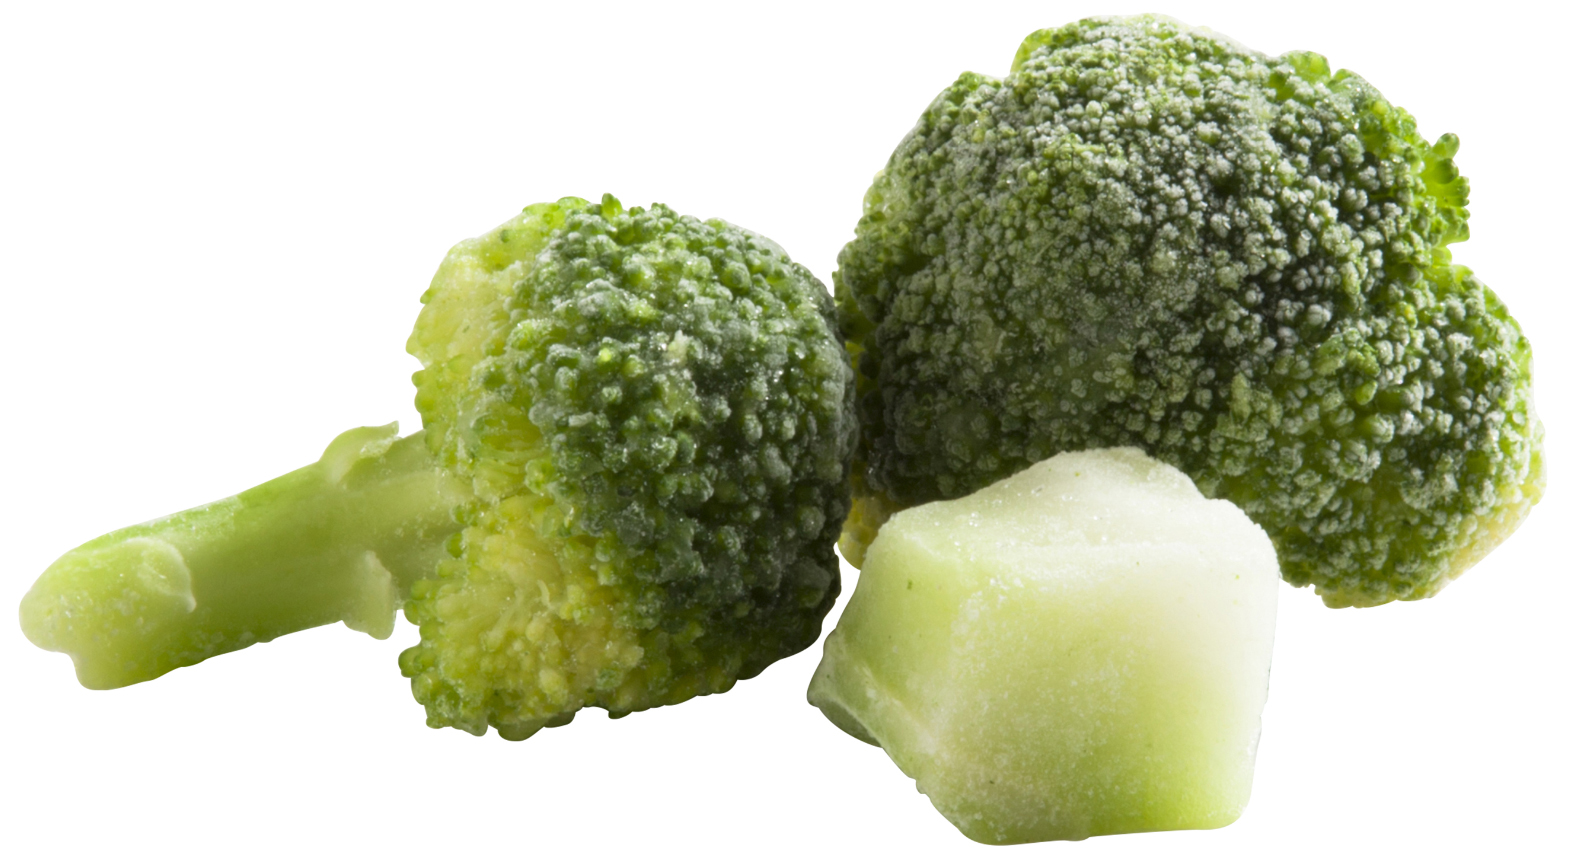 https://lavifood.com/en/products/blanching/broccoli